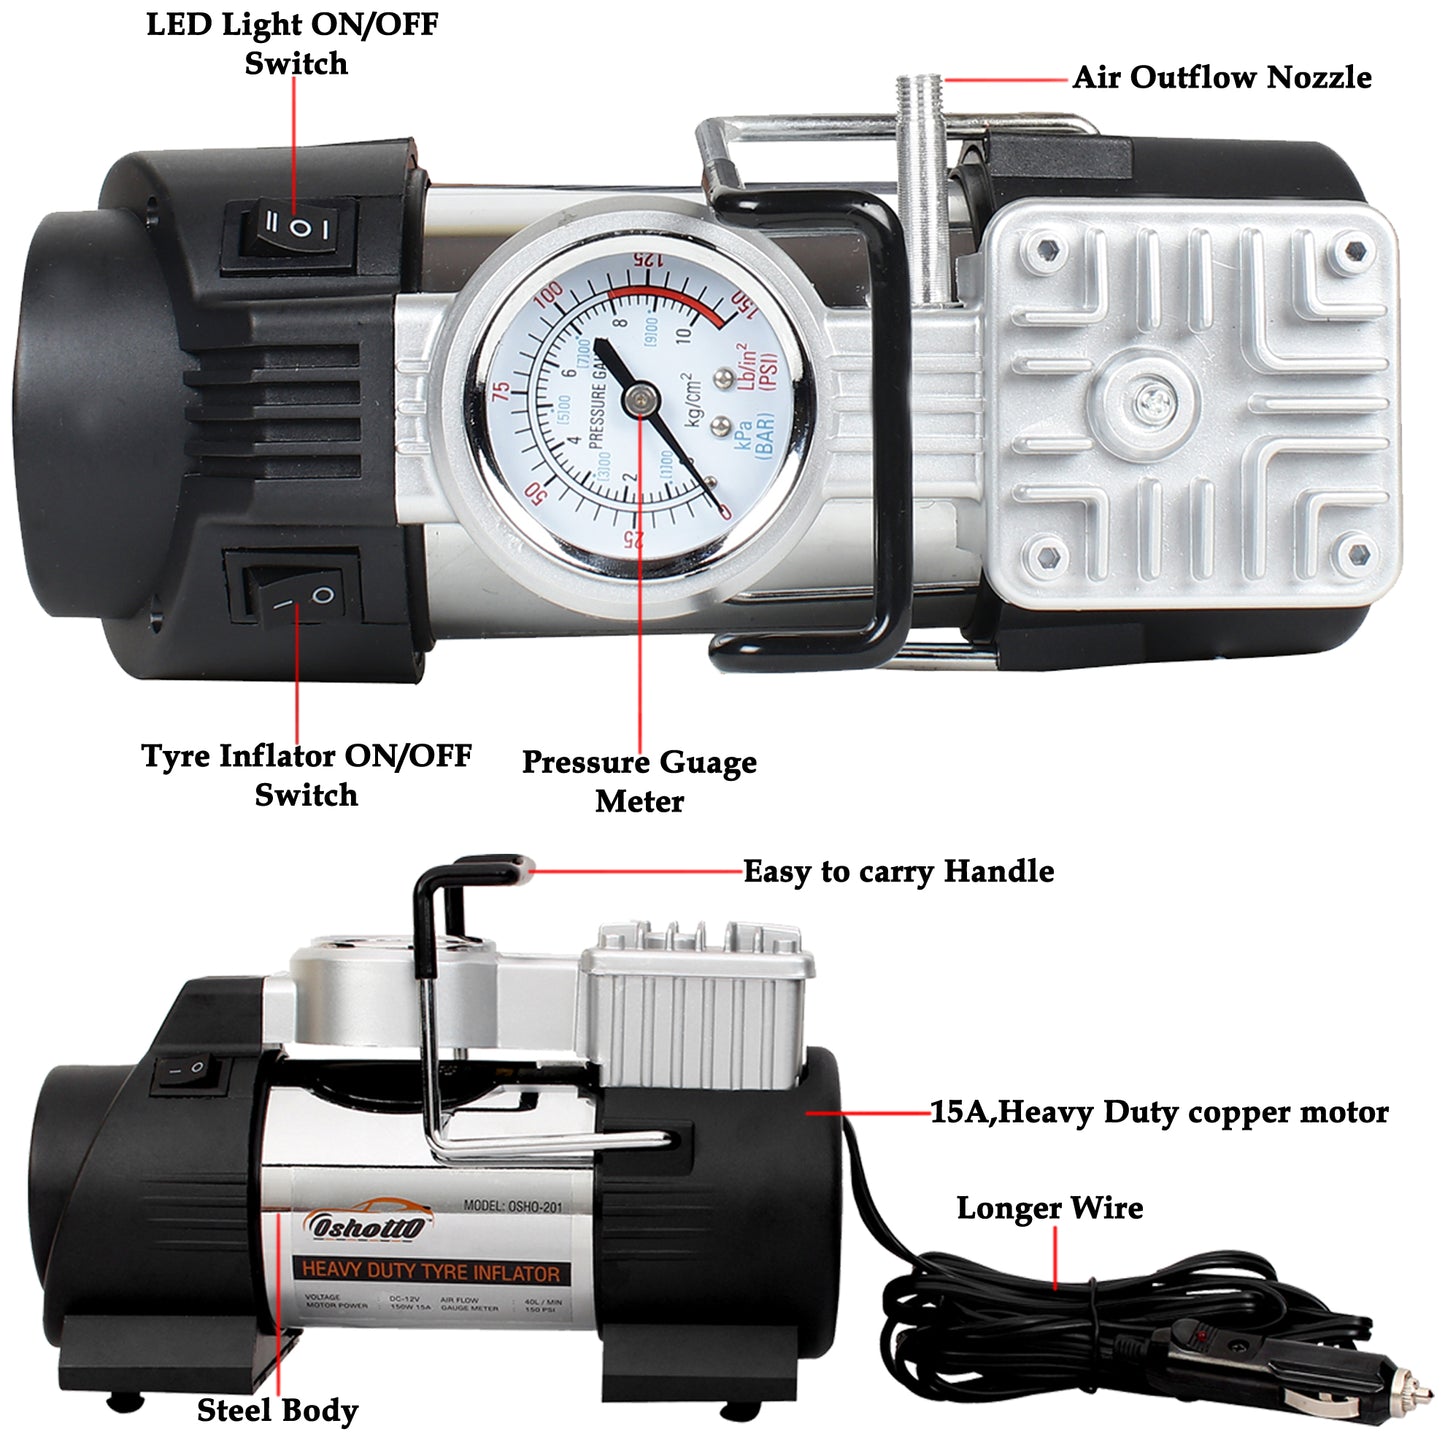 Oshotto 12V Heavy Duty with 100W Copper Motor Double Cylinder Air Compressor/Tyre Inflator-Steel Body